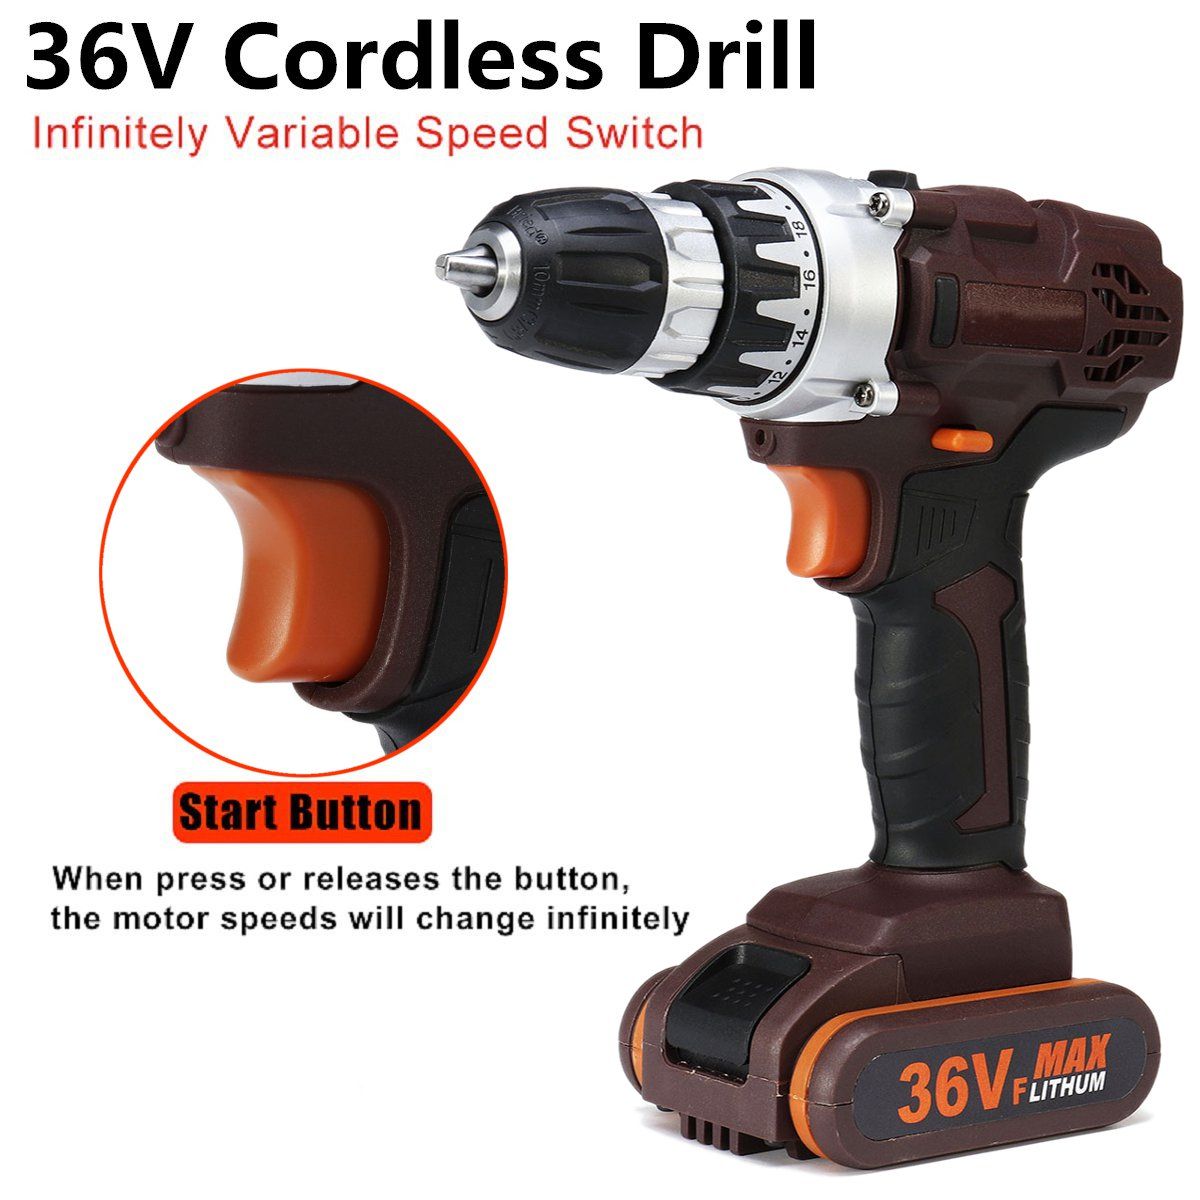 36V-Rechargable-Power-Drills-Cordless-Lithium-Electric-Drill-181-Torque-Stage-1406361